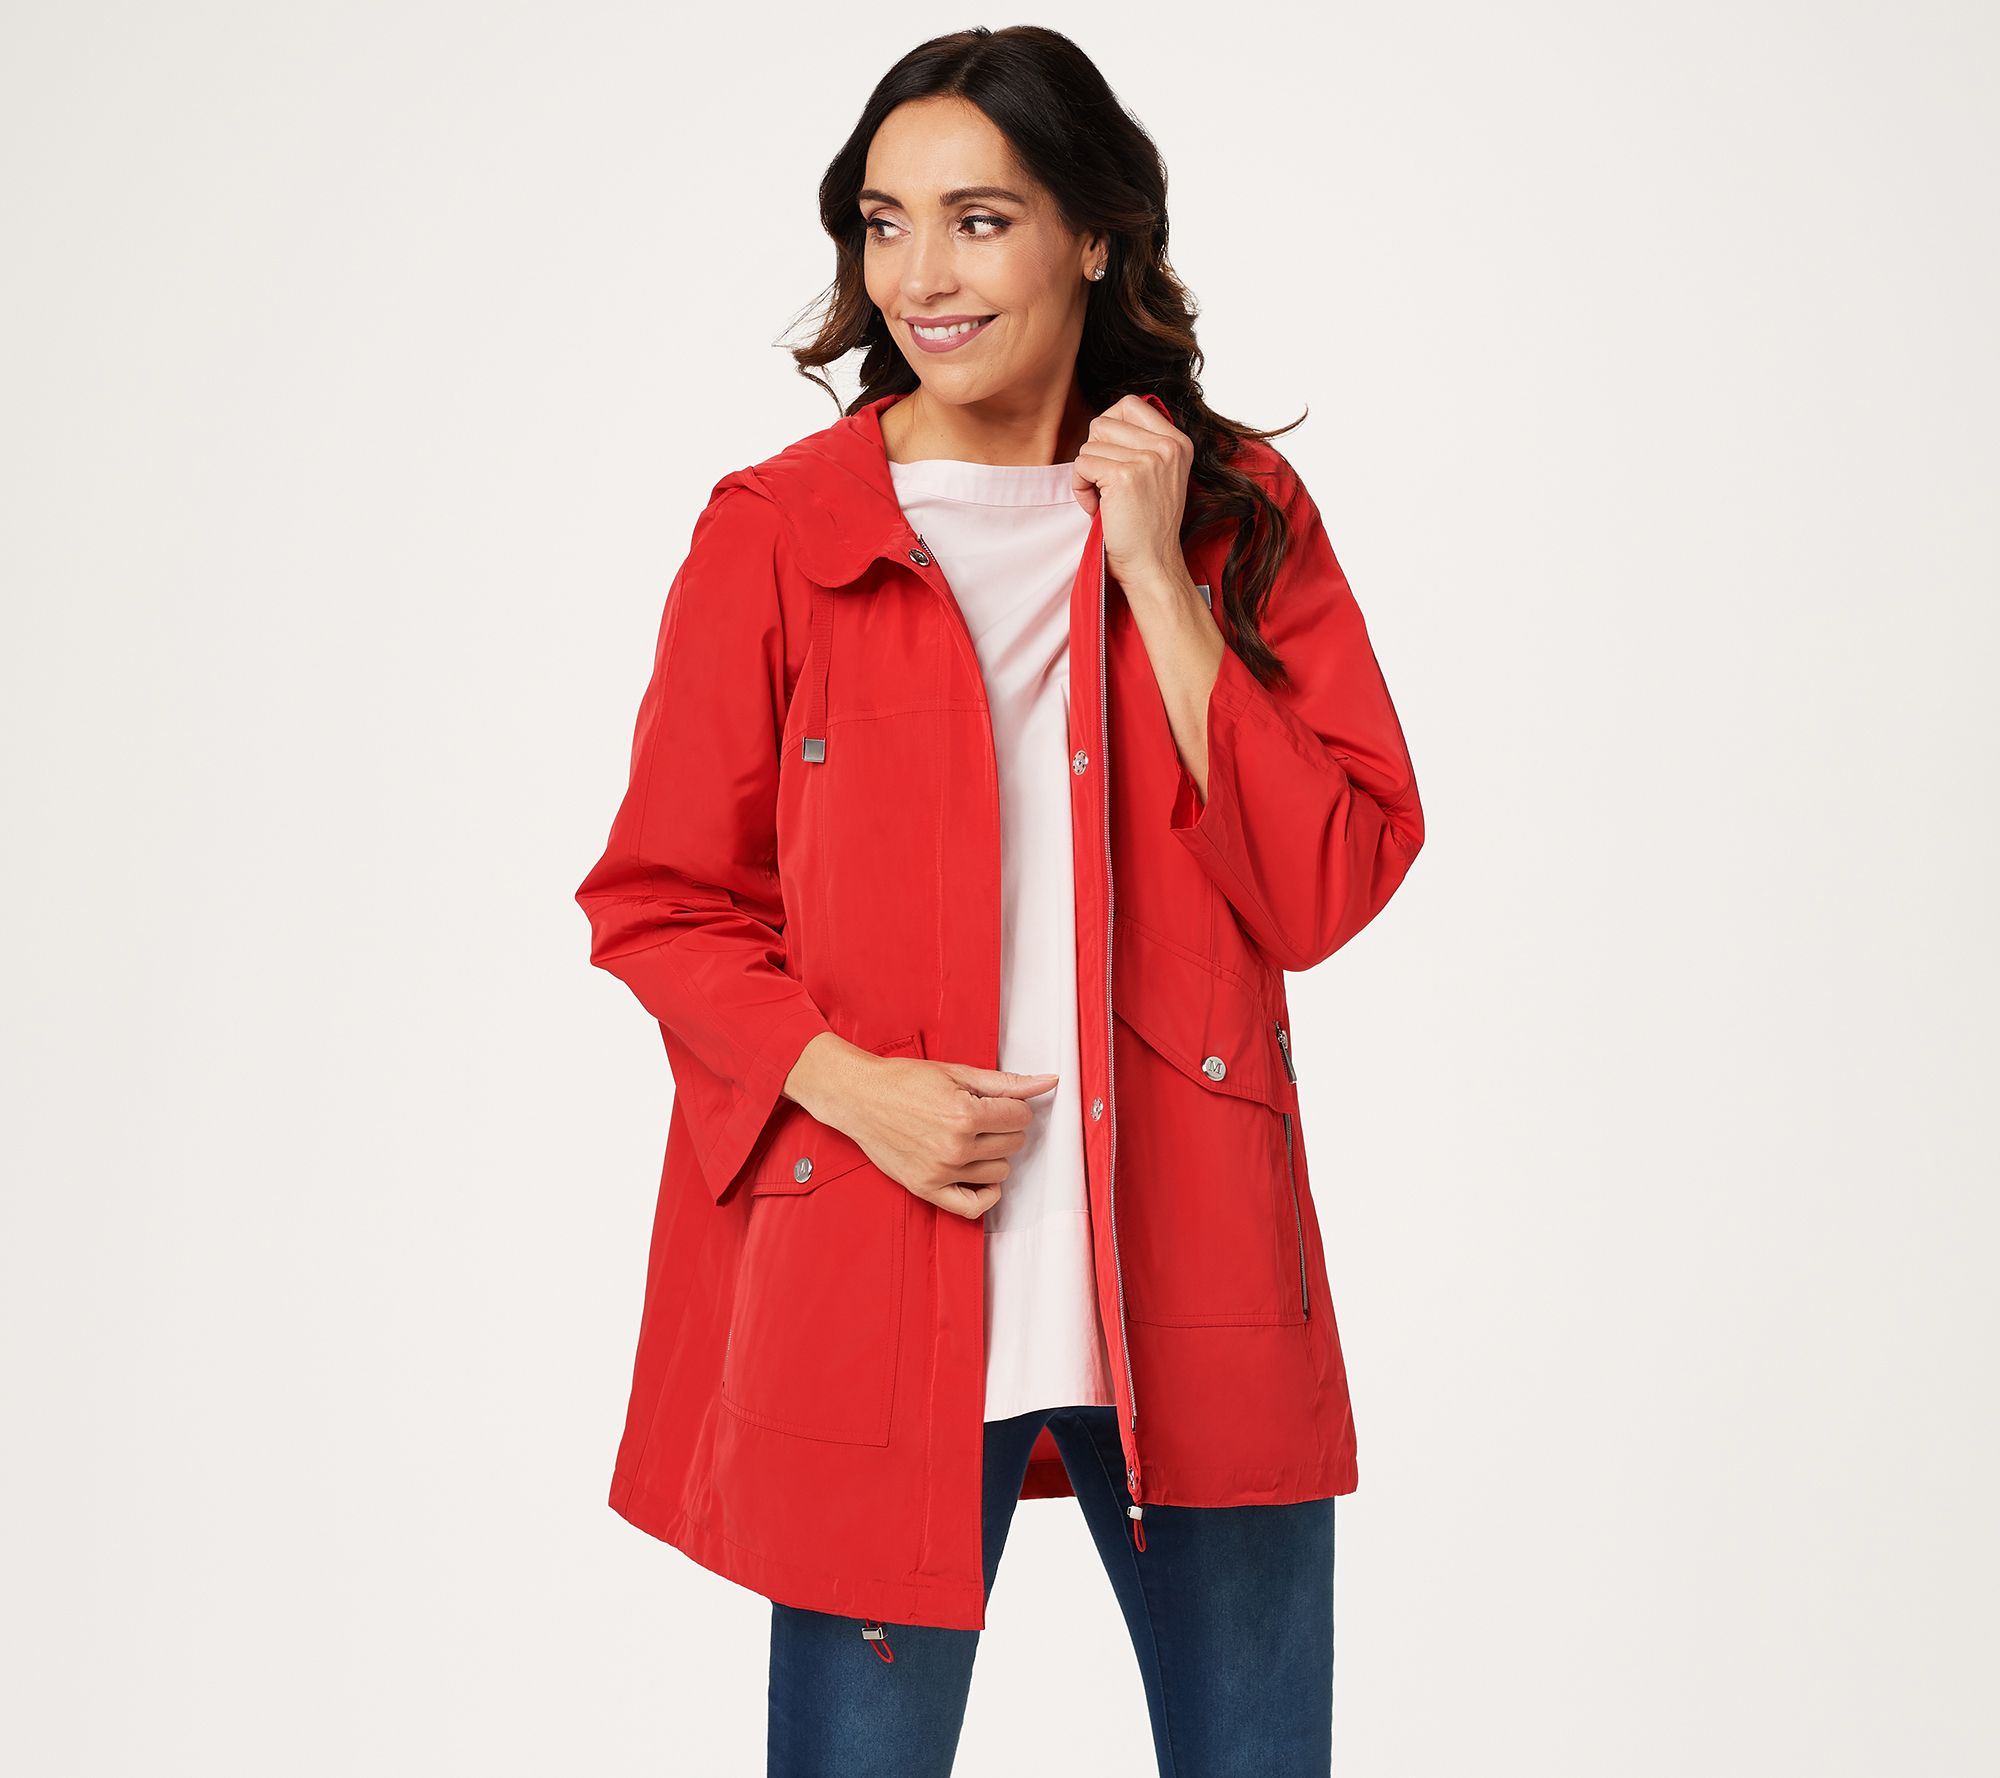 Martha Stewart Water Resistant Seamed Zip Front Jacket with Hood - QVC.com